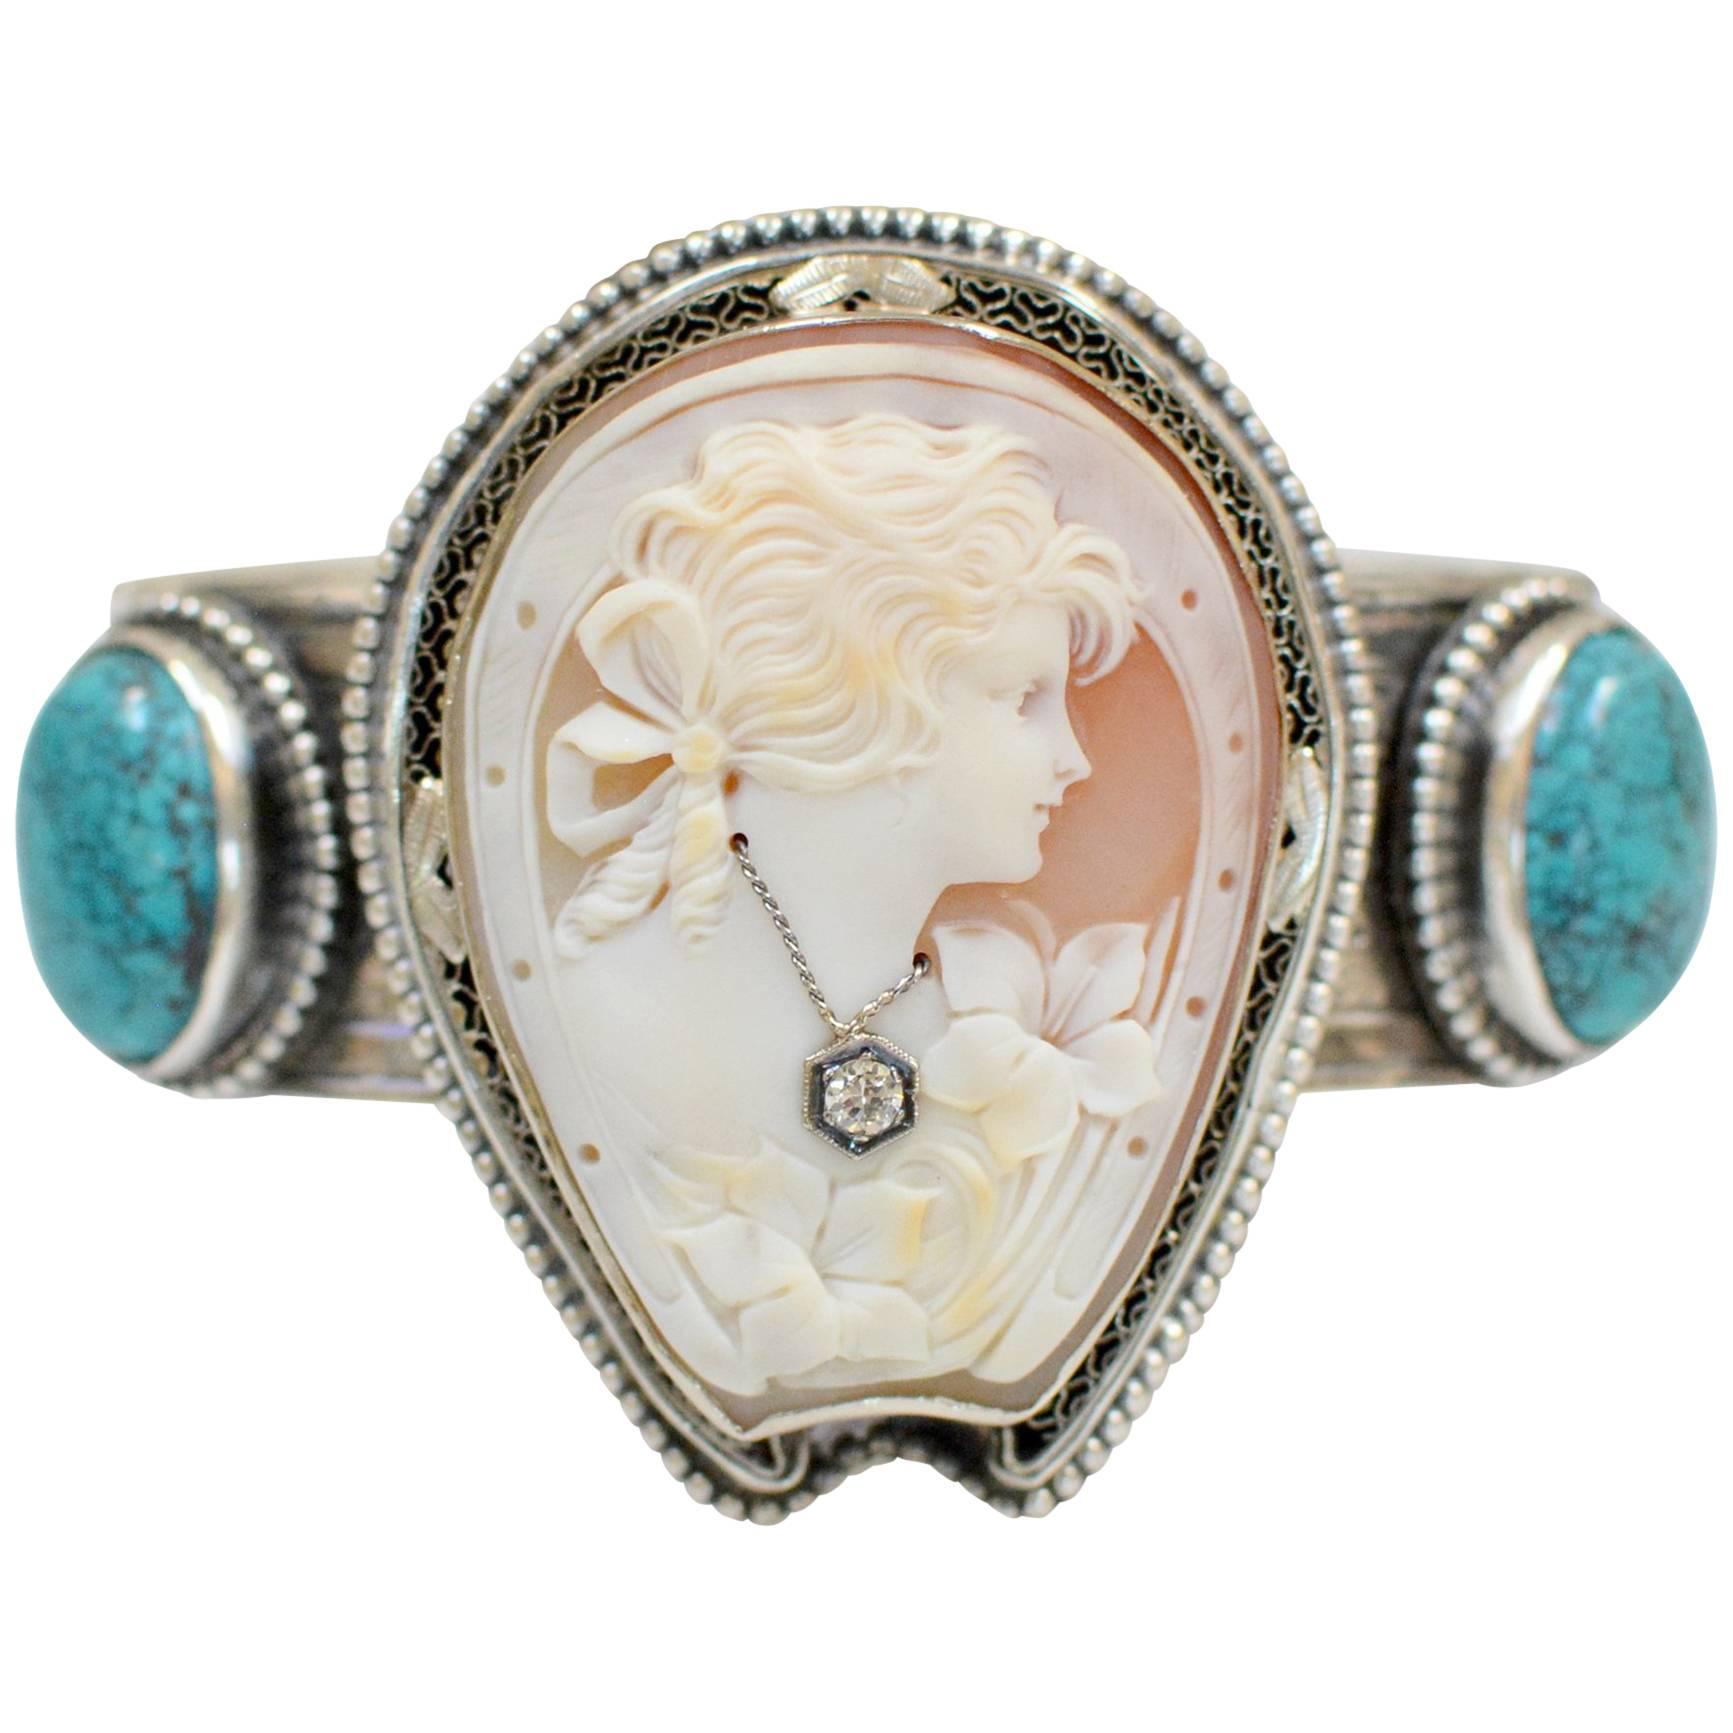 Jill Garber Fine Antique Horseshoe Cameo with Diamond and Turquoise Bracelet